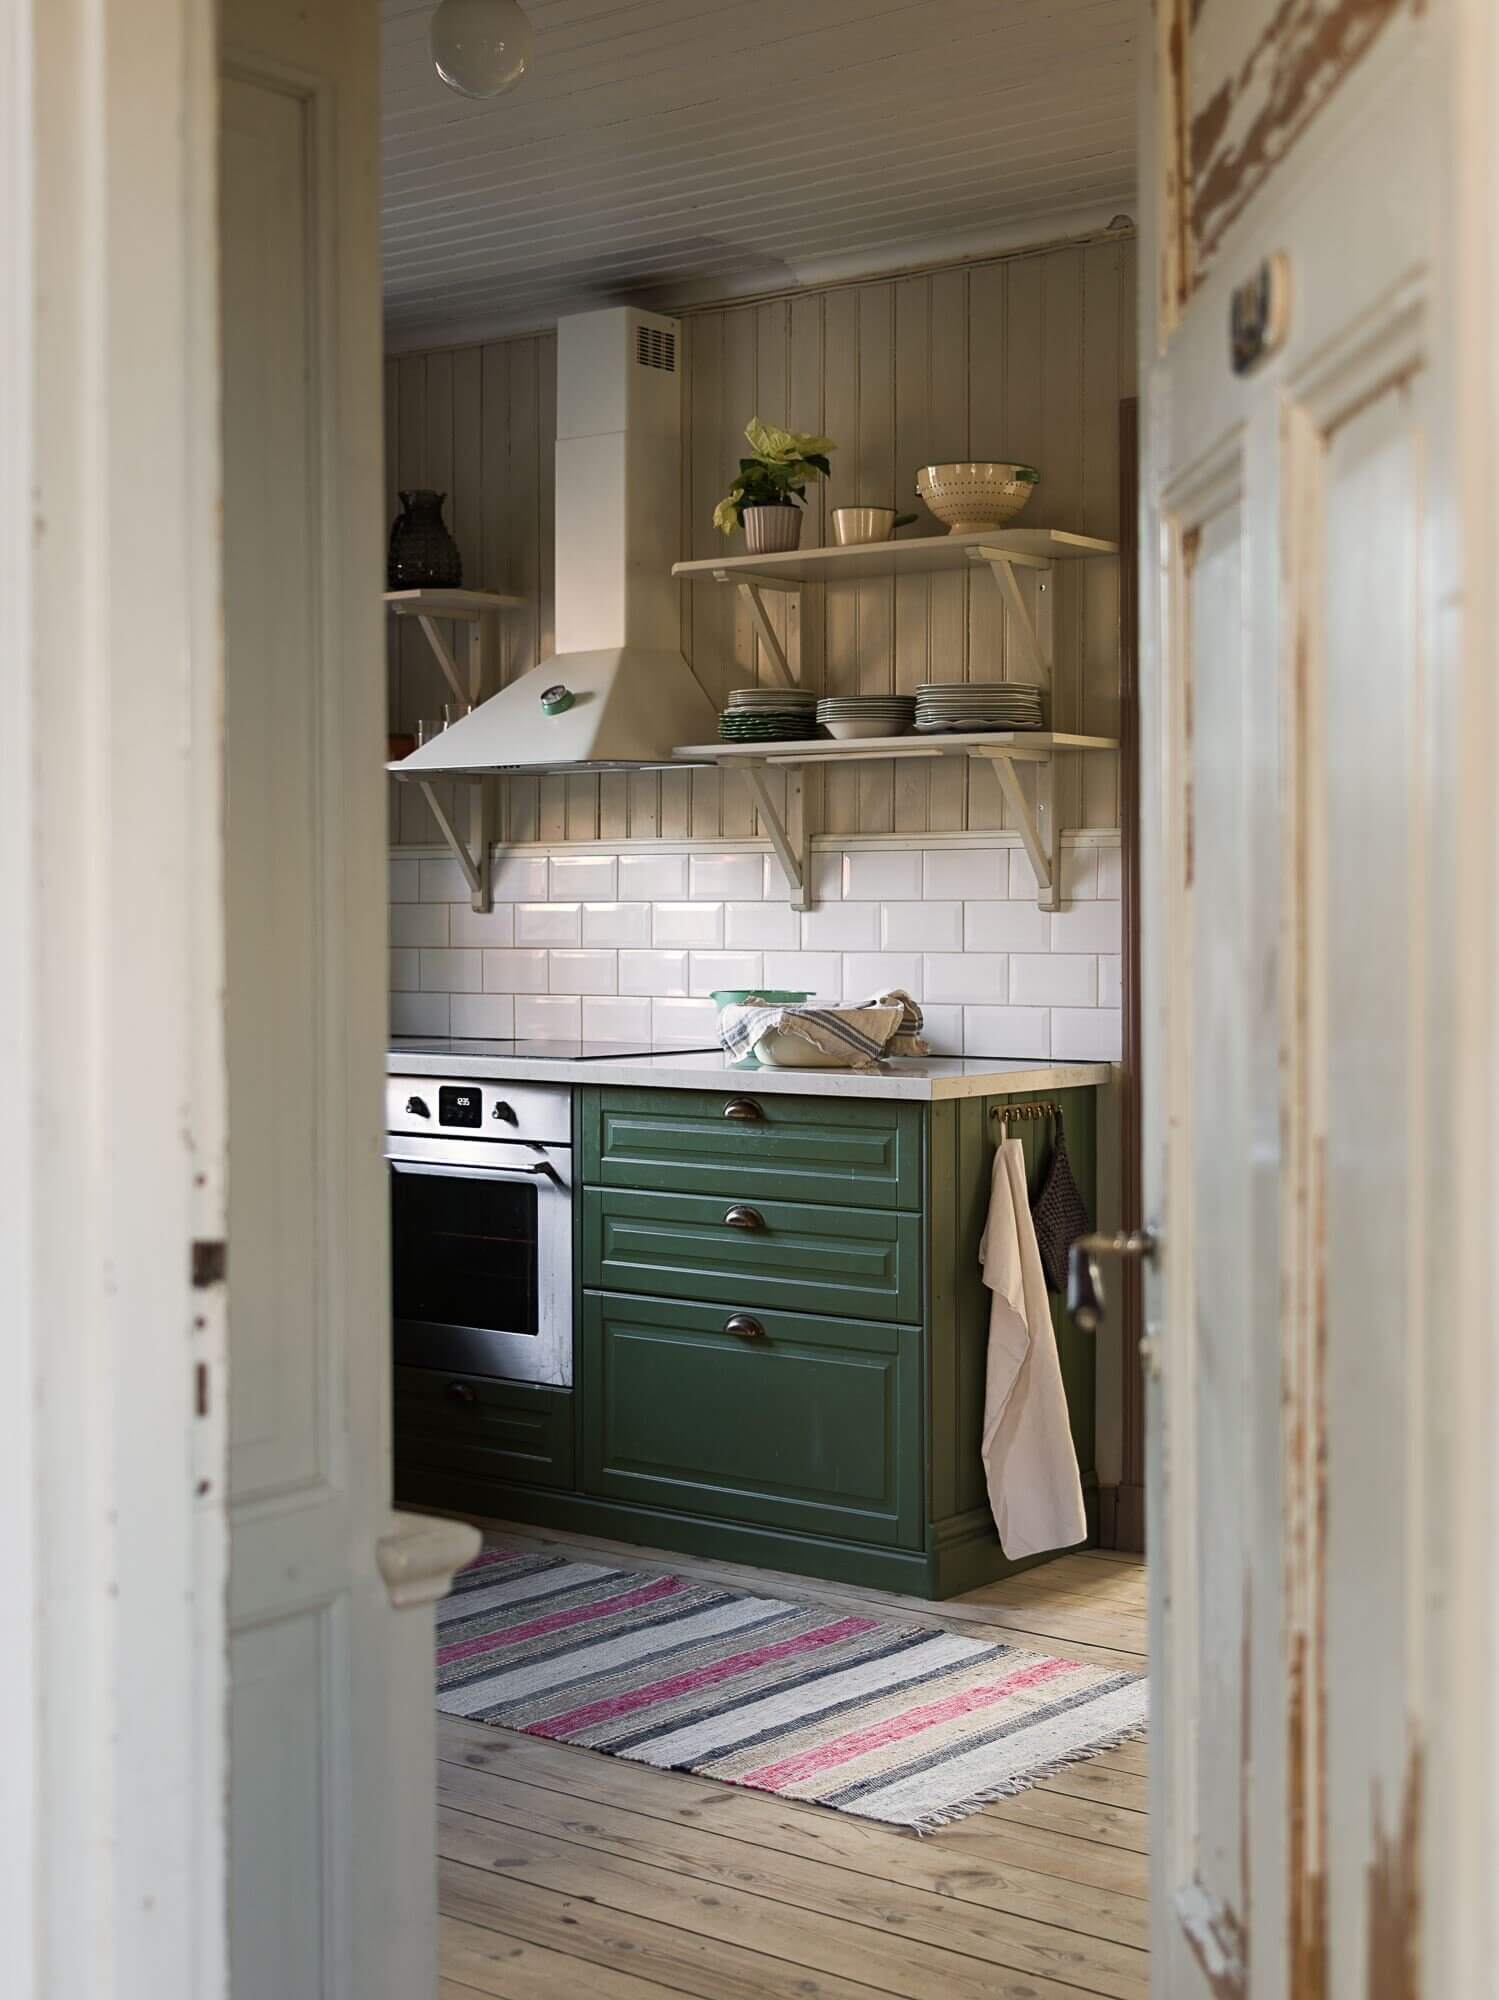 ACozyVintageLookForaTraditionalSwedishHome TheNordroom7 A Cozy Vintage Look For a Traditional Swedish Home